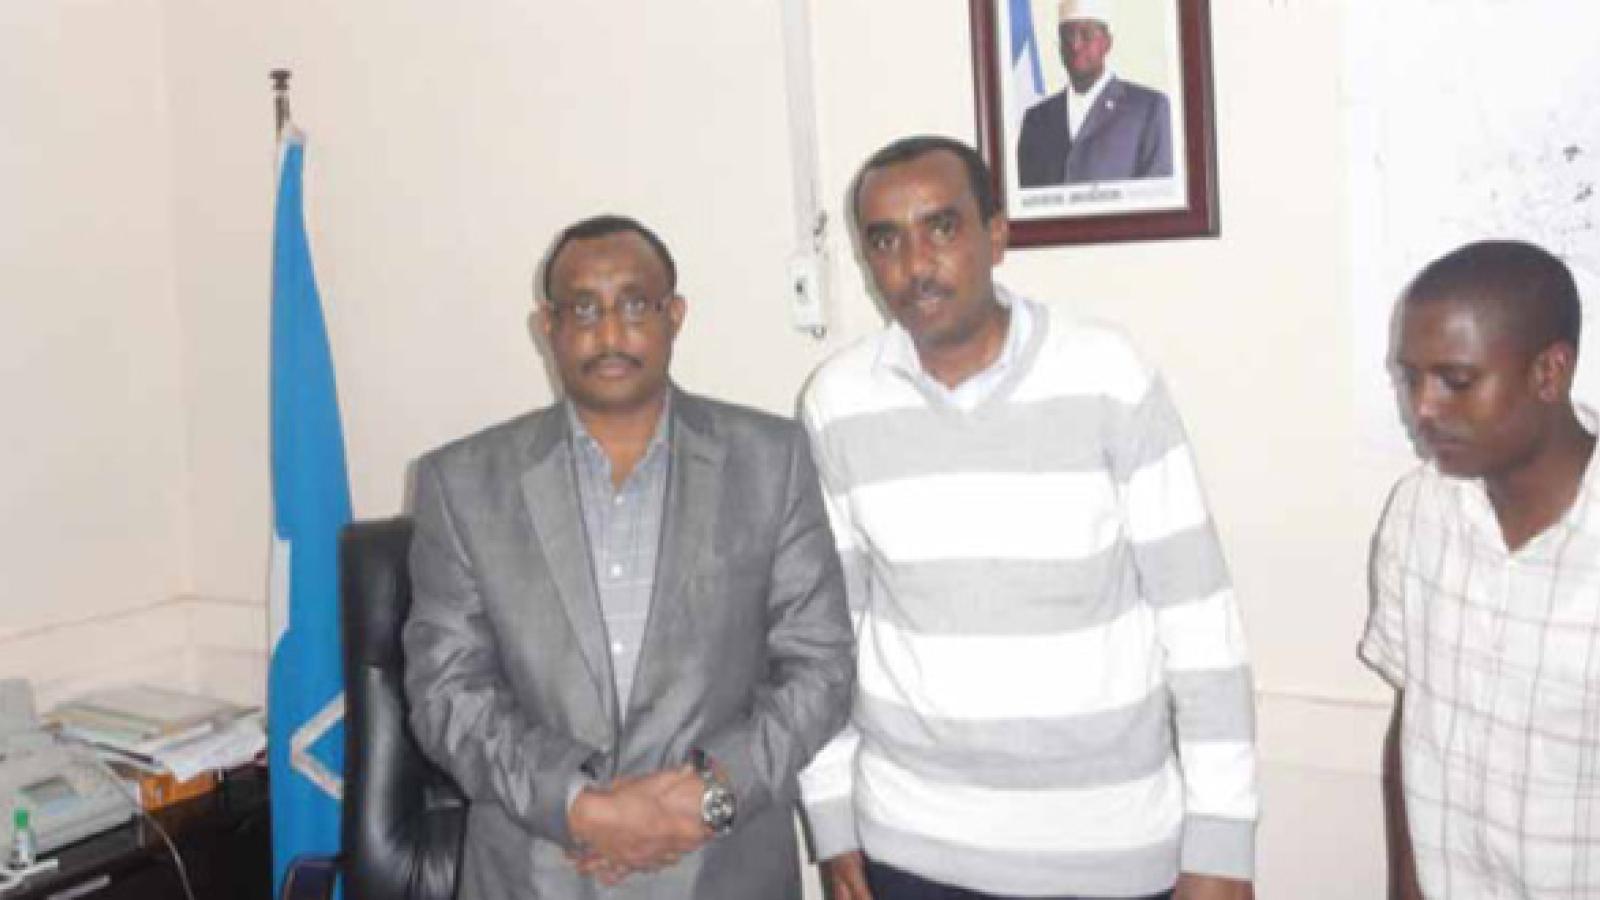 International Studies alumni, Mr. Abdullahi Isse Abdulle, (center) discussing with the Somali Prime Minister (left) his concerns about population movements.